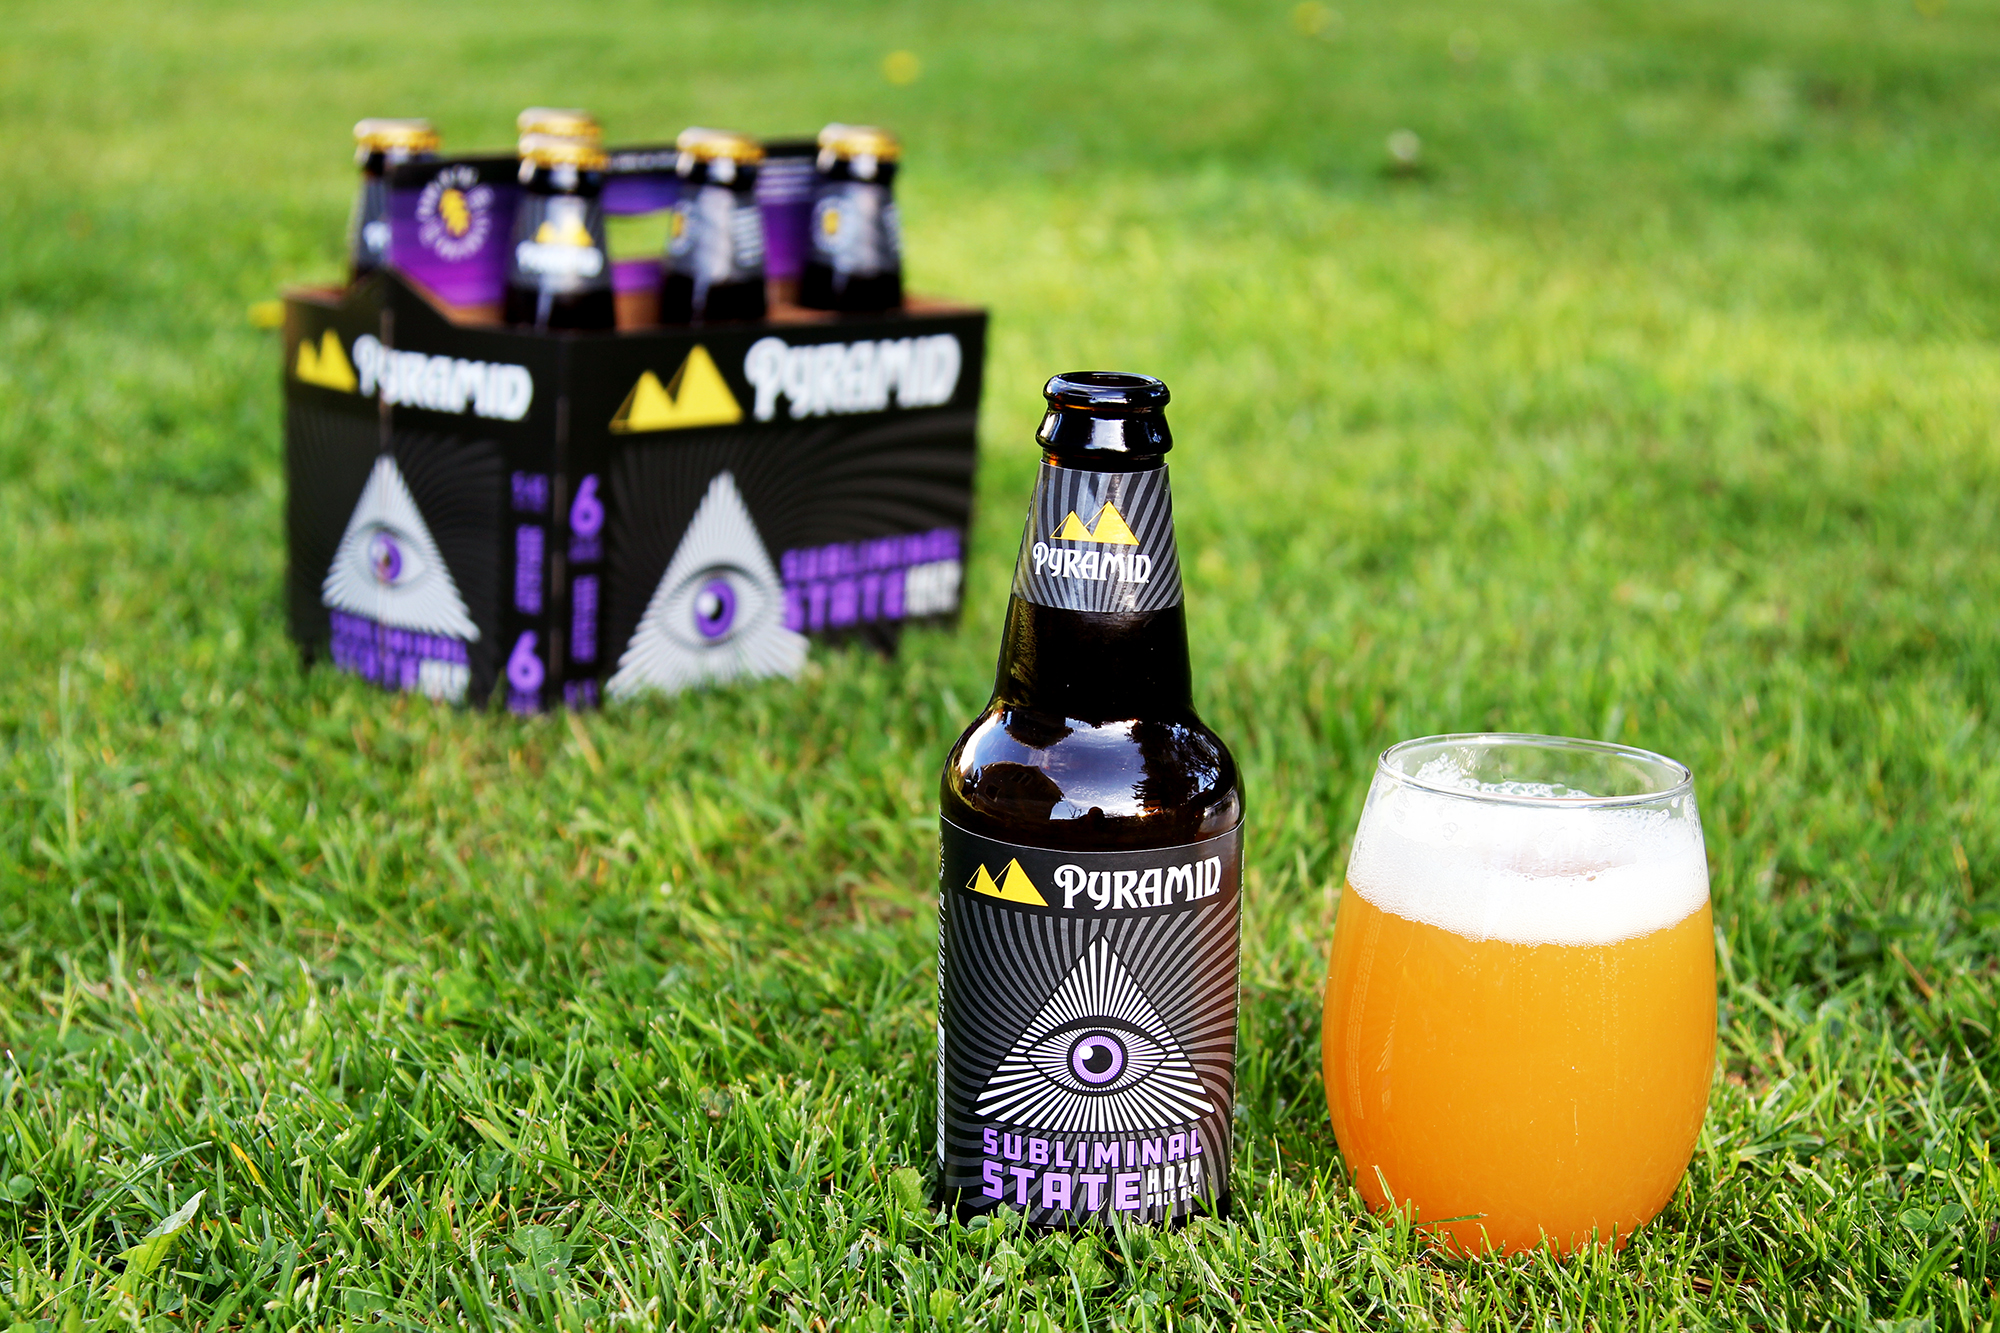 image of Subliminal State Hazy Pale Ale courtesy of Pyramid Brewing